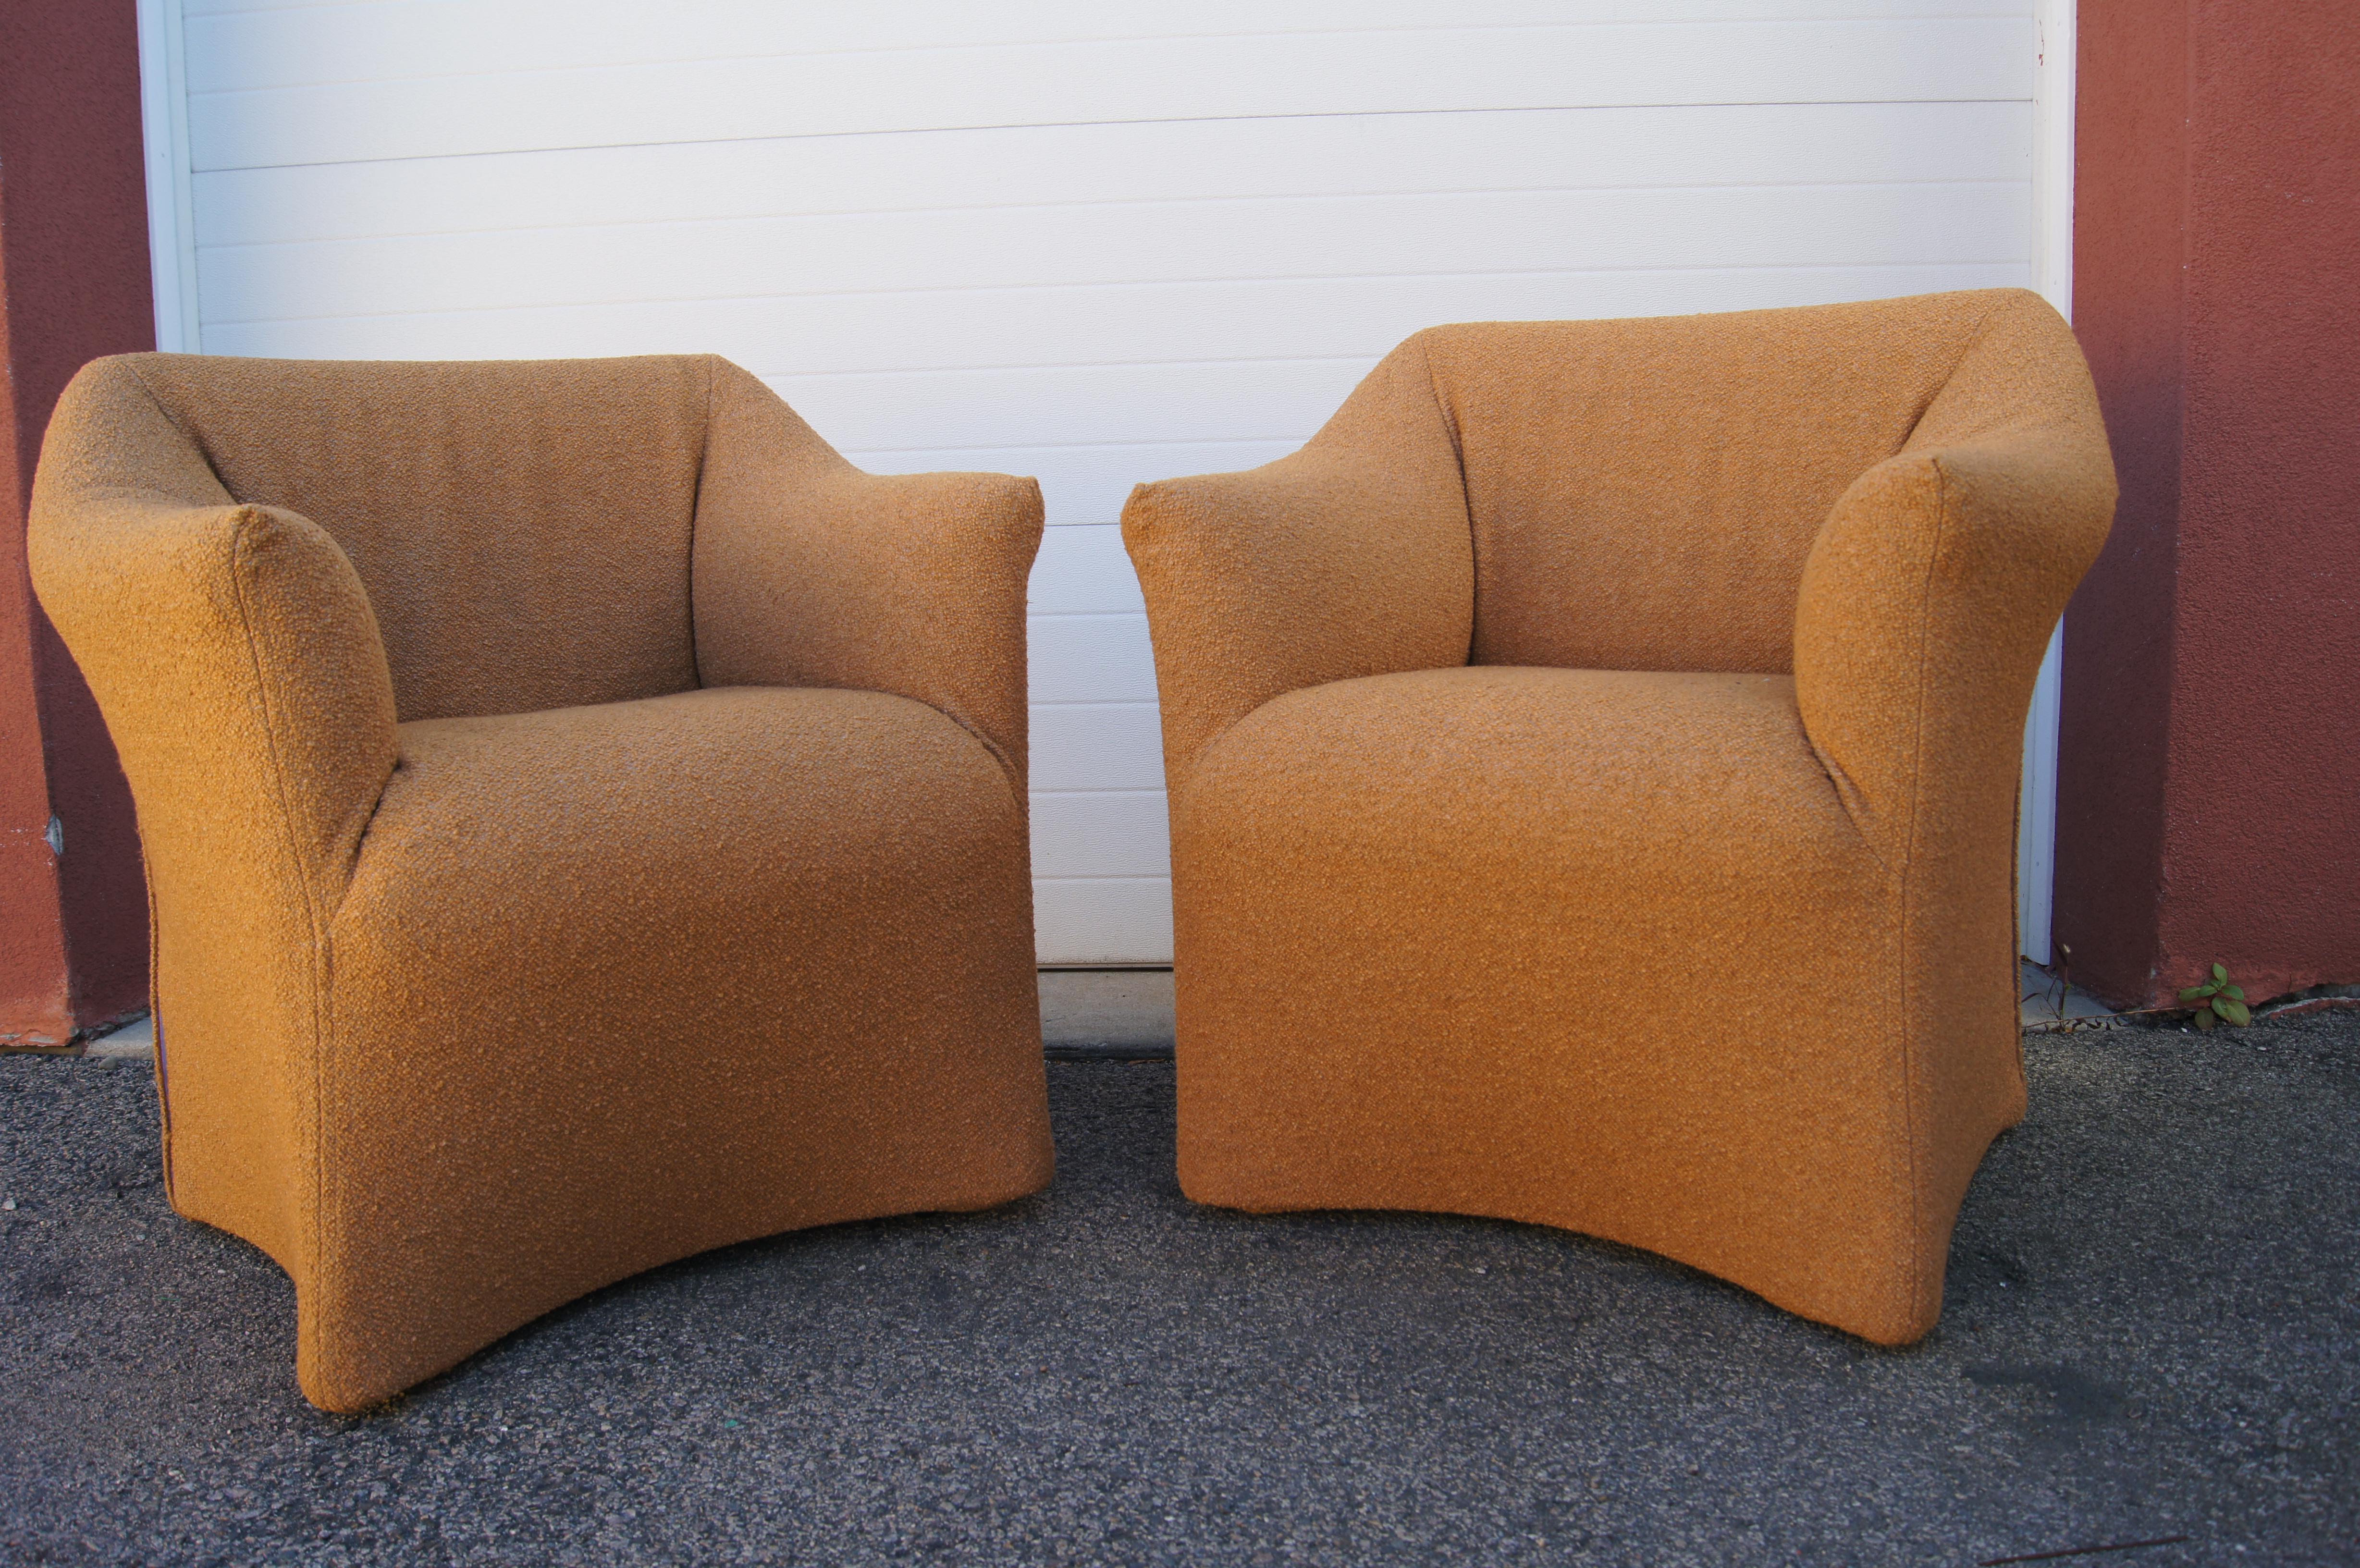 European Pair of Tentazione Lounge Chairs, Model 684, by Mario Bellini for Cassina